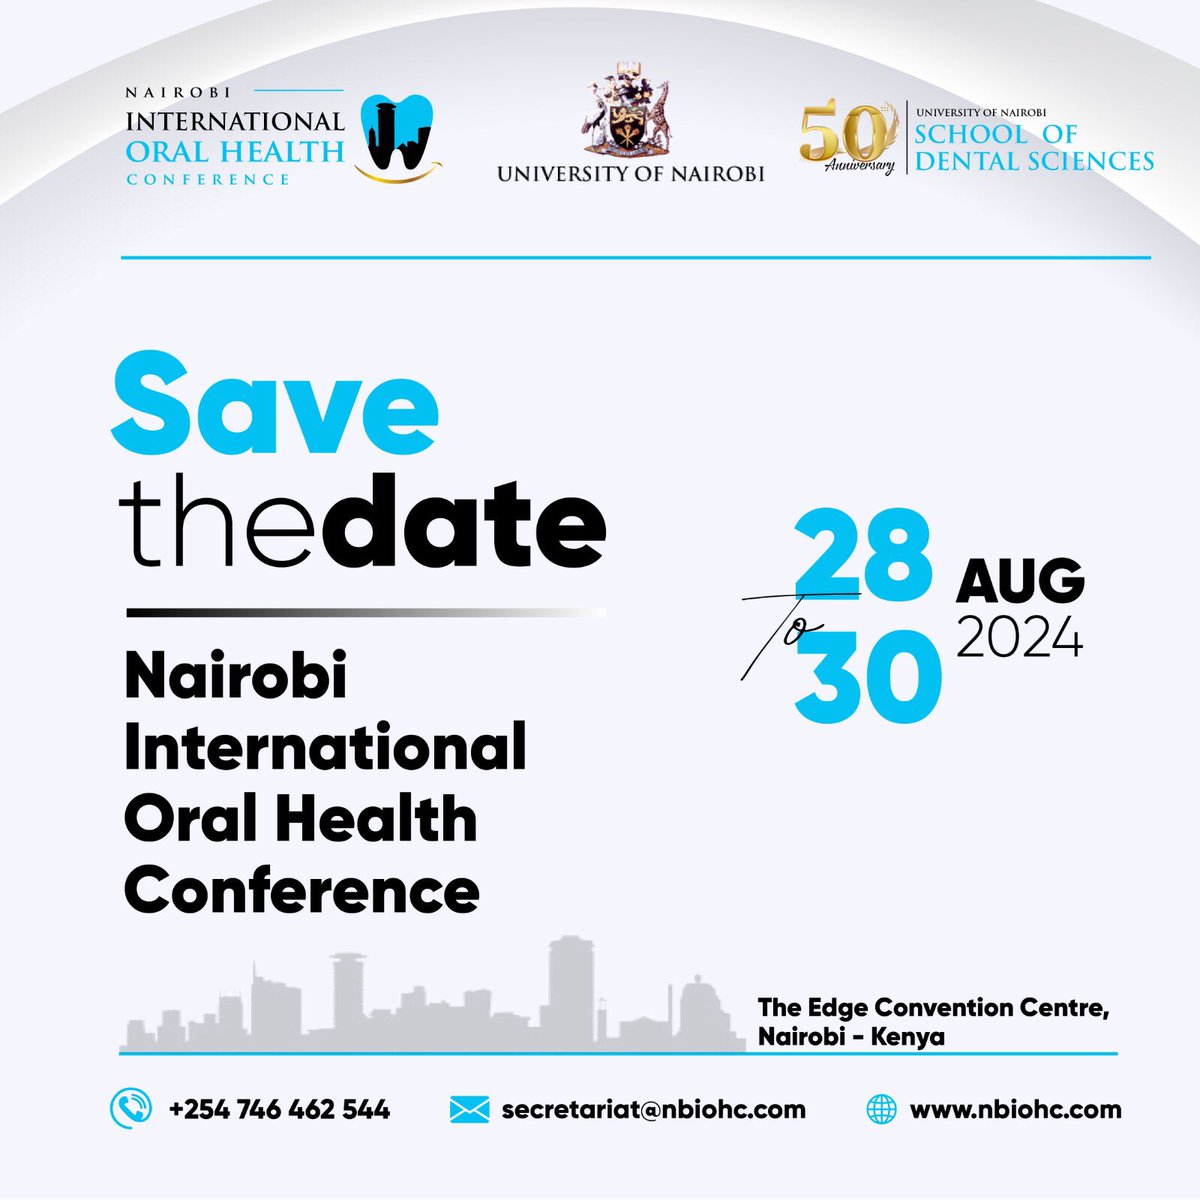 Are you ready for the biggest oral health conference in africa❔The #NBIOHC2024 is around the corner. Visit our website at nbiohc.com for more details. Early bird tickets are quickly running out,register today #oralhealthcare #savethedate